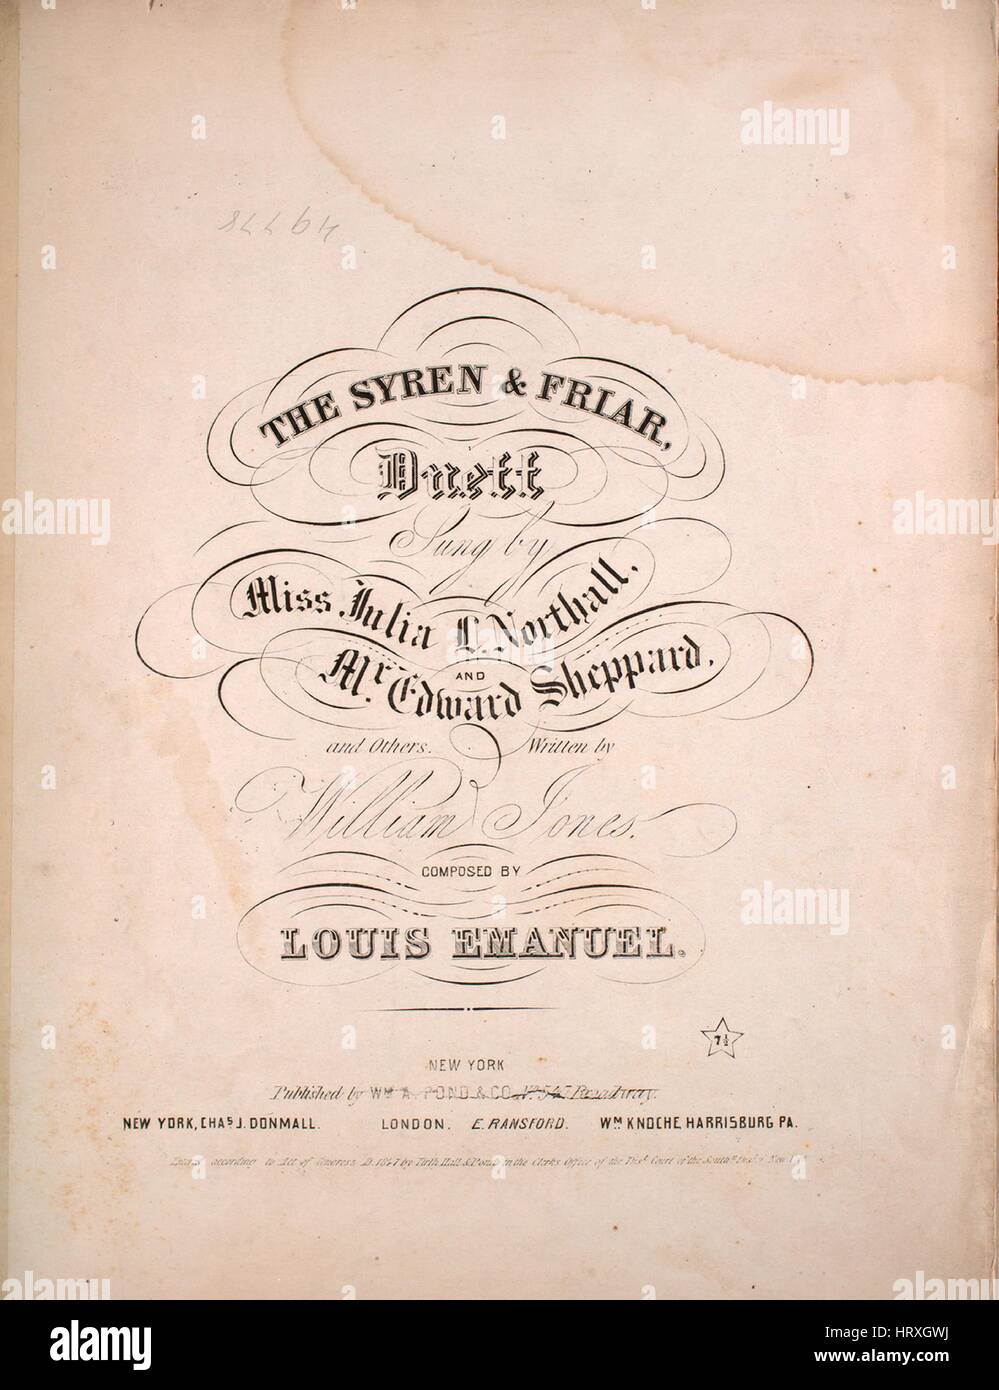 Sheet music cover image of the song 'The Syren and Friar Duett', with original authorship notes reading 'Composed by Louis Emanuel Written by William Jones', United States, 1847. The publisher is listed as 'Wm. A. Pond and Co., No. 547 Broadway', the form of composition is 'sectional', the instrumentation is 'piano and voice', the first line reads 'Good Friar! Good Friar! thy skiff turn aside', and the illustration artist is listed as 'None'. Stock Photo